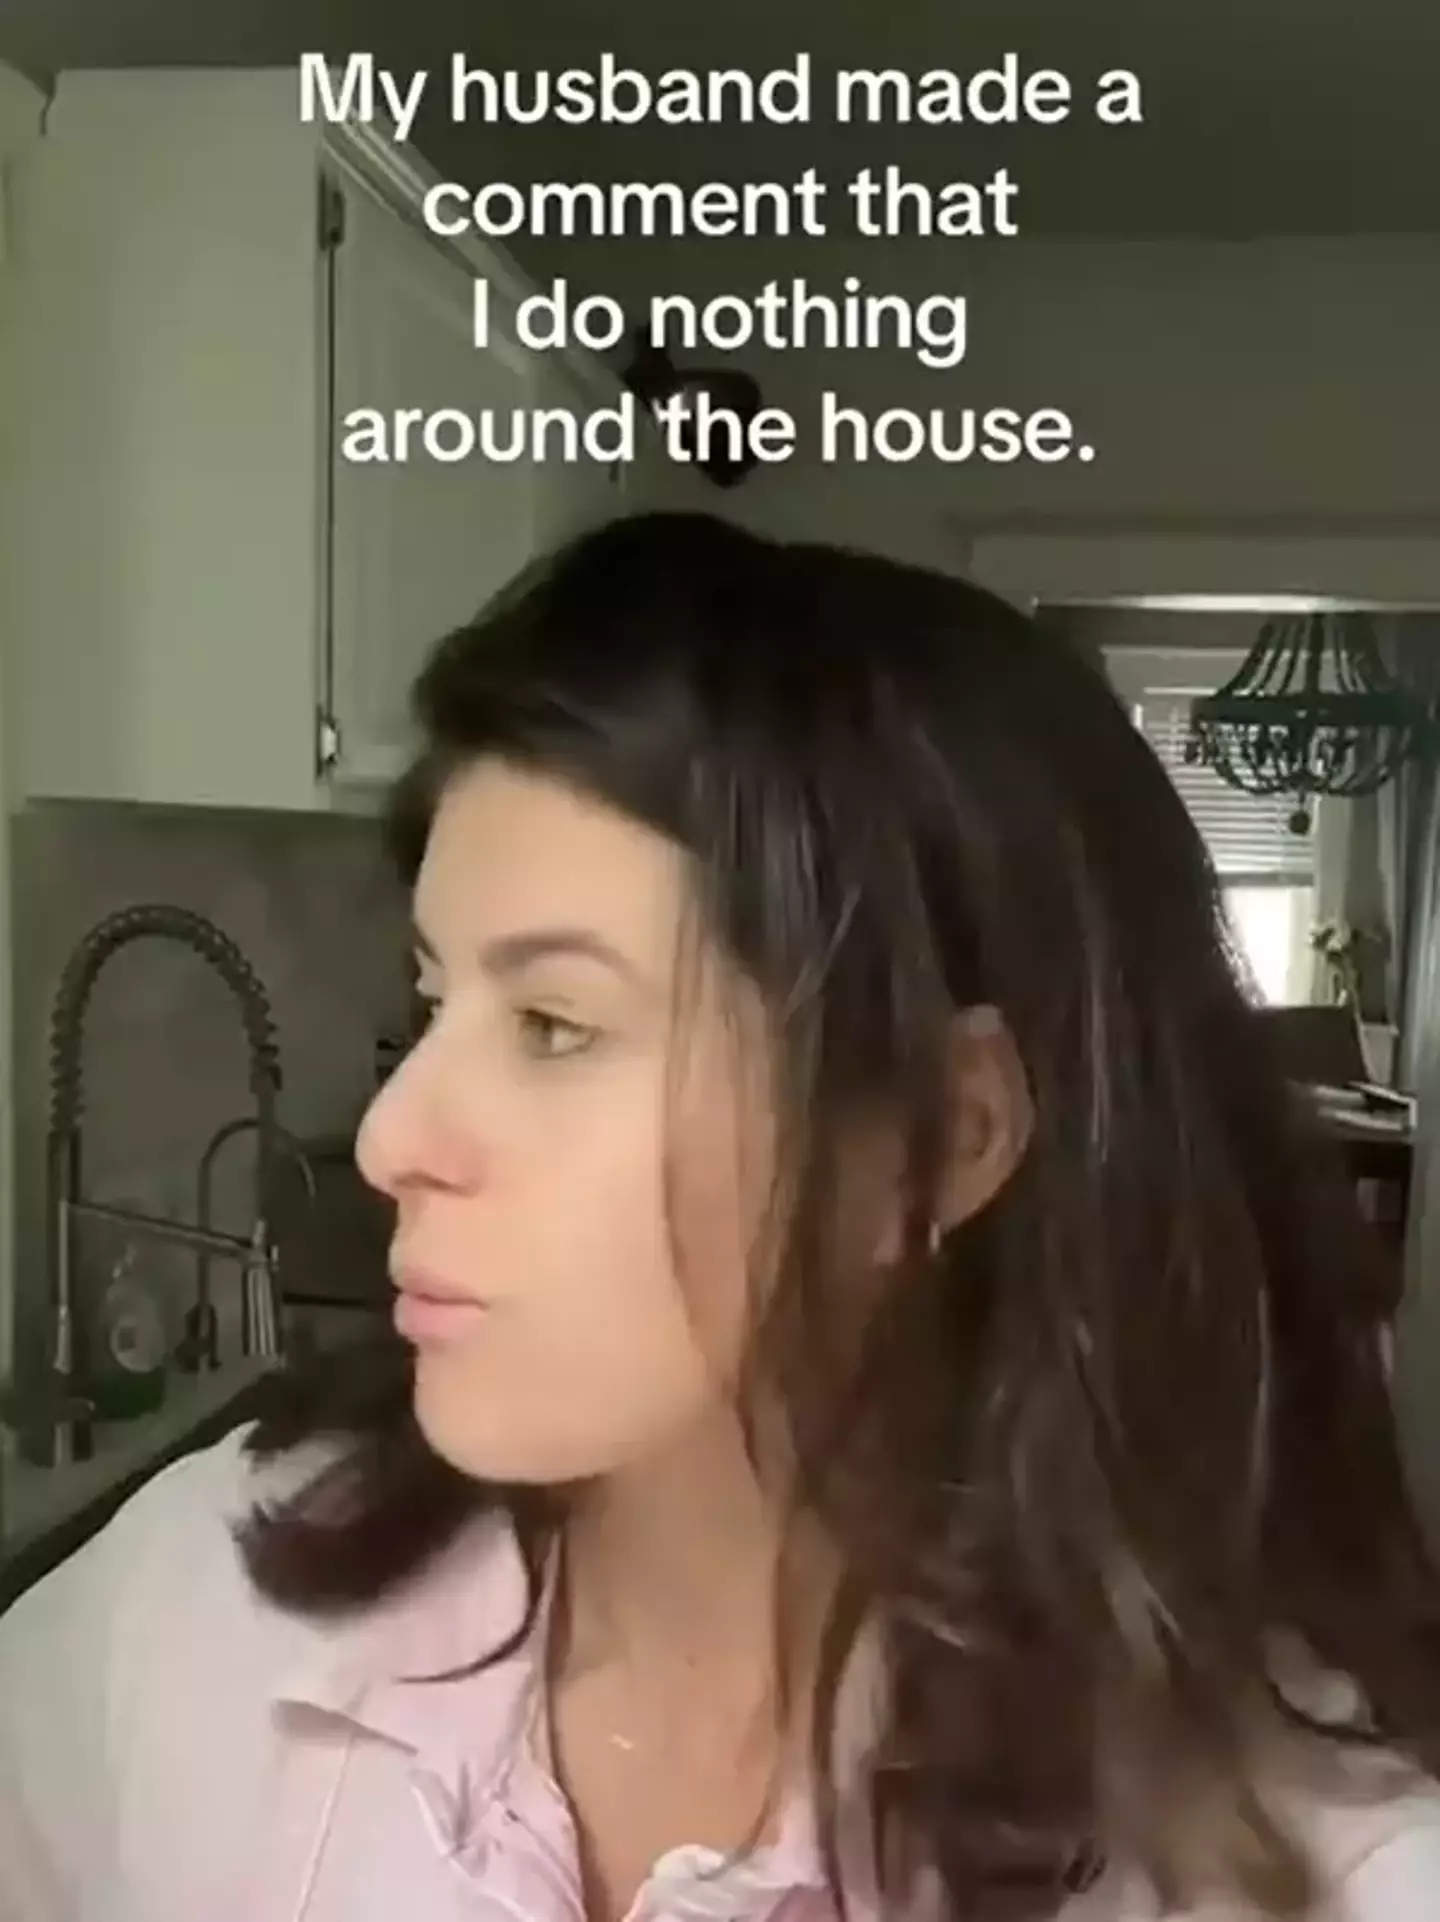 The TikToker claimed her husband said she did 'nothing' around the house.